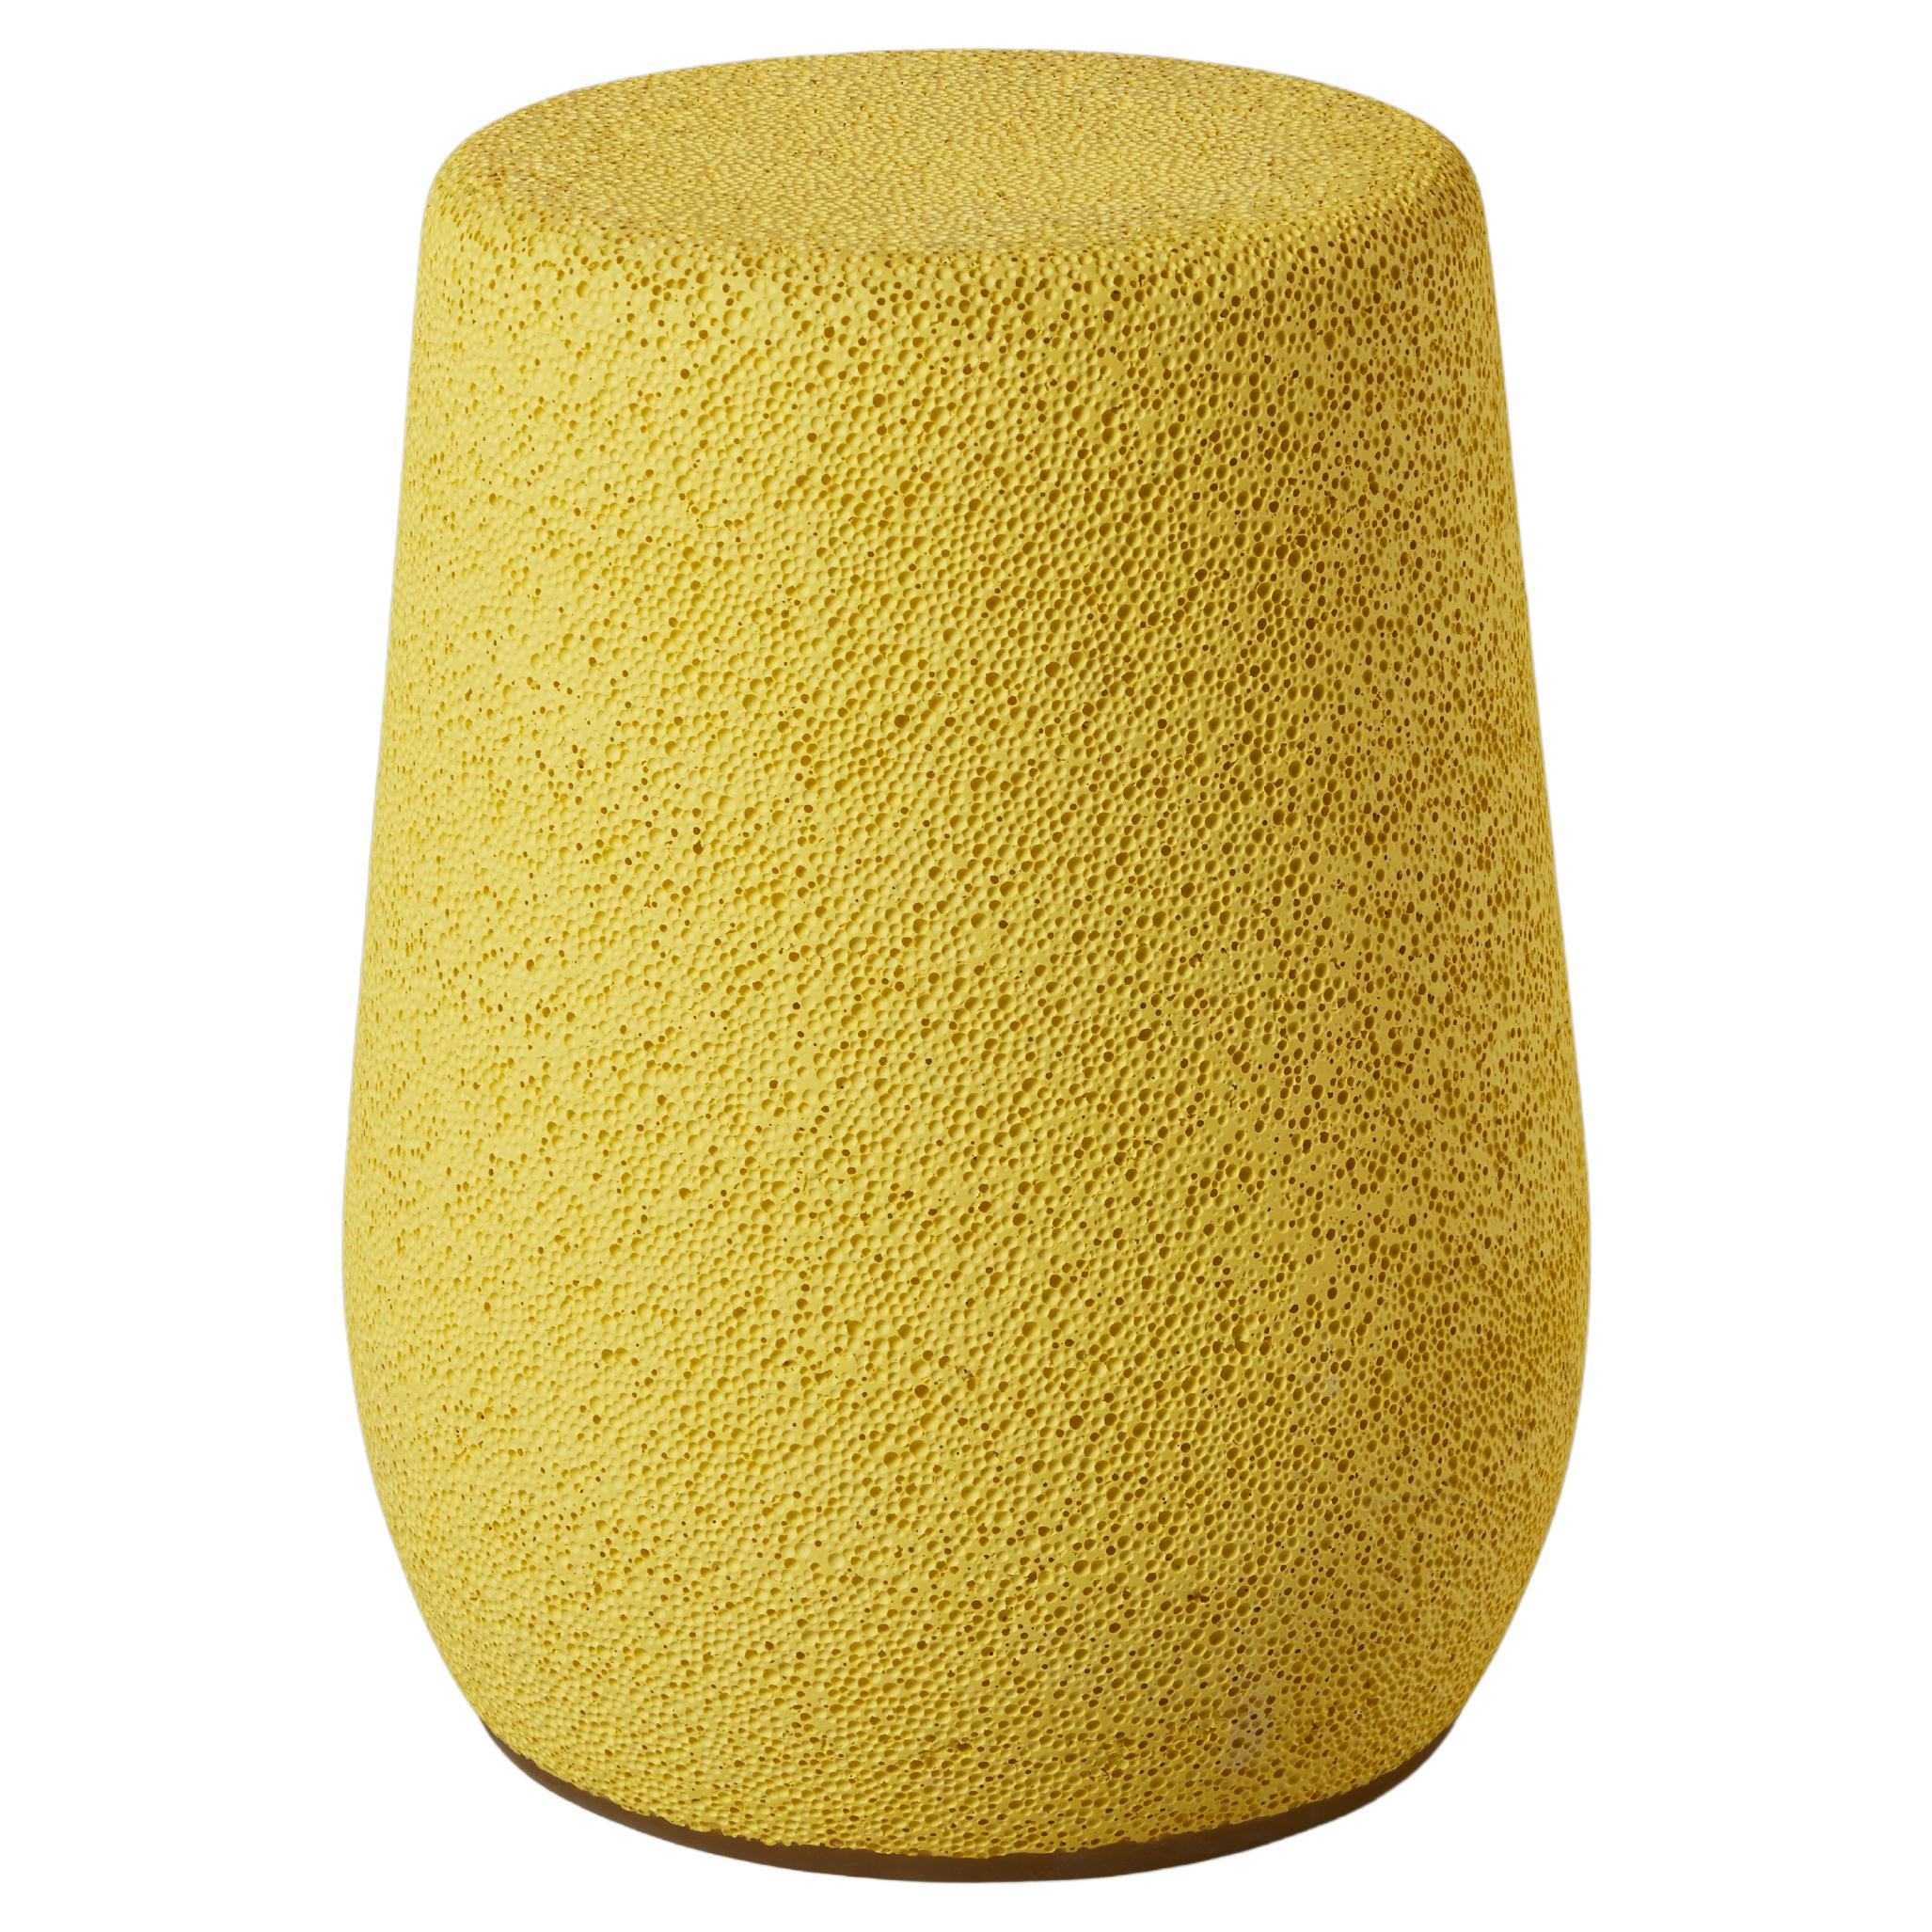 'Lightweight Porcelain' Stool and Side Table by Djim Berger - Bright Yellow For Sale